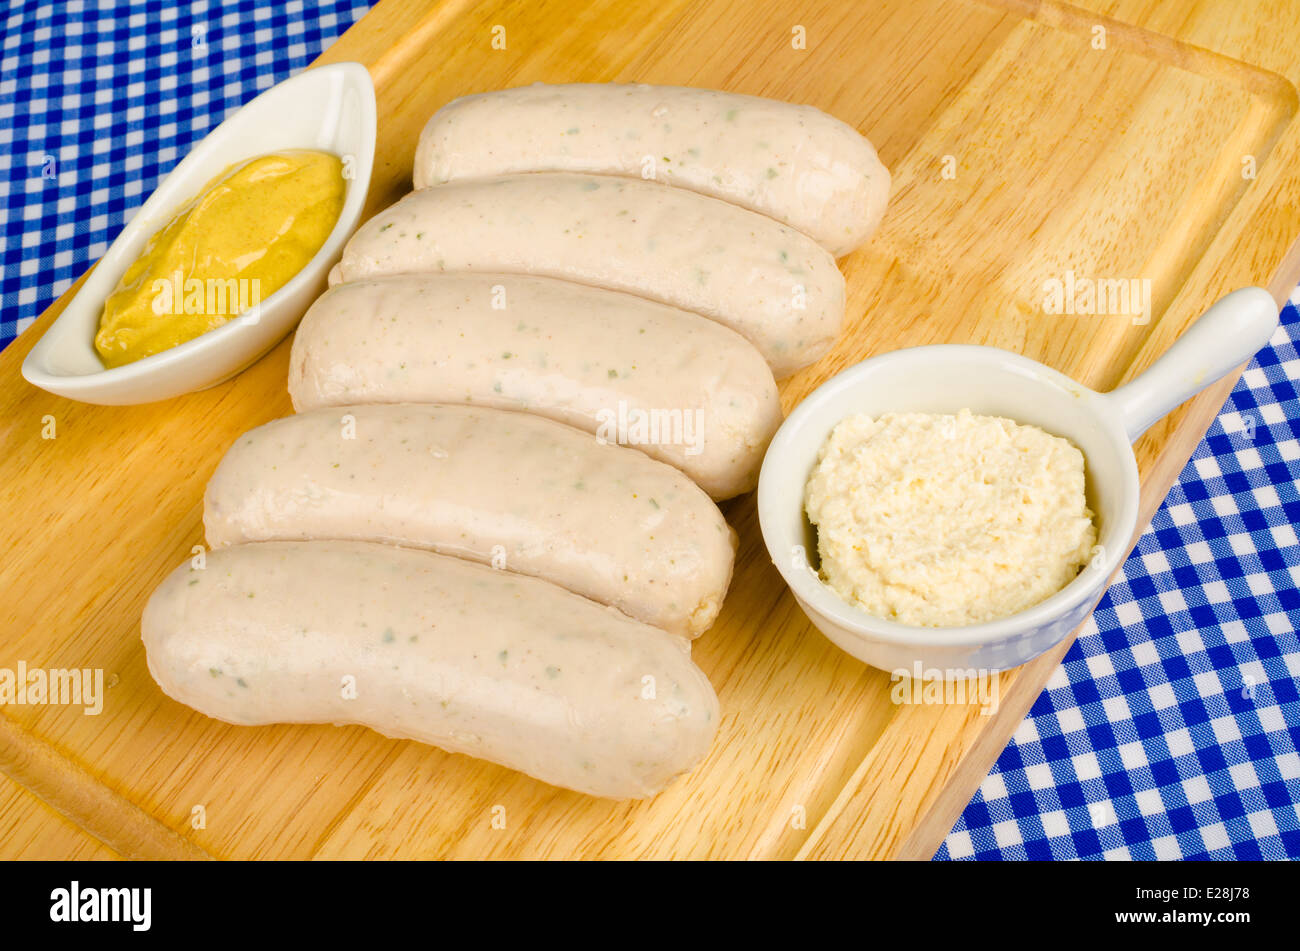 German Bratwurst sausages with mustard and horseradish, traditional food Stock Photo